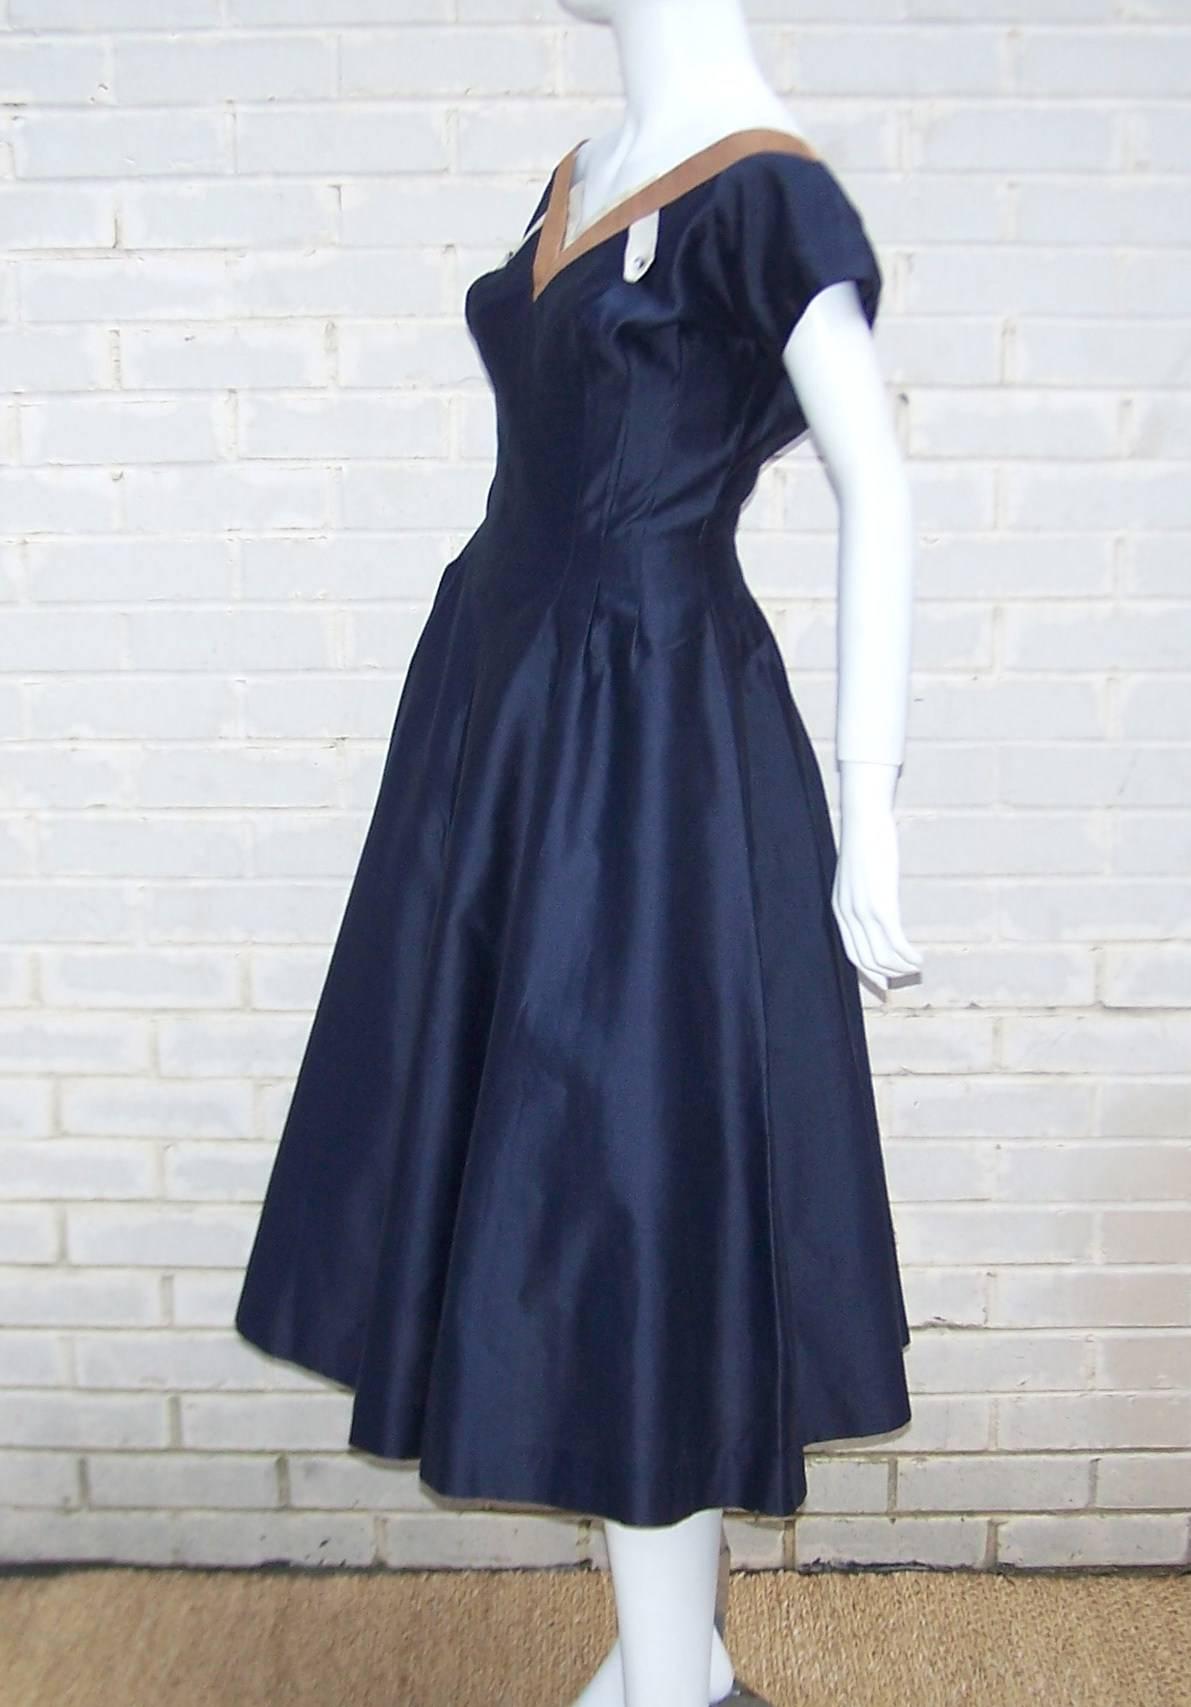 Black Classic 1950's Reich Original Navy Blue Full Skirted Party Dress